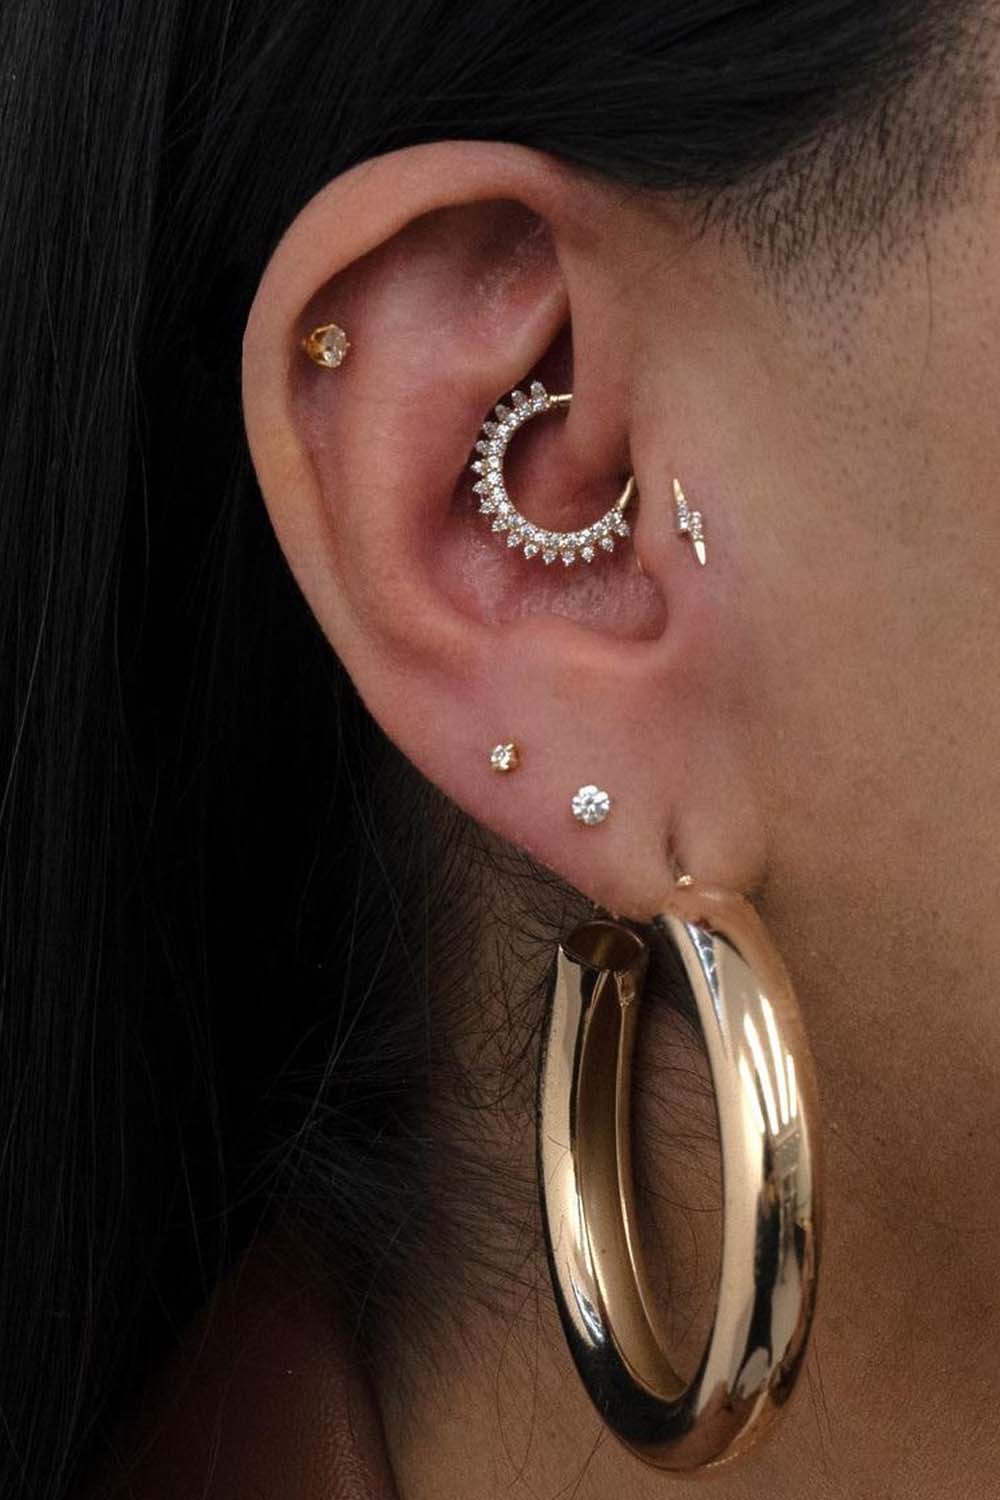 Daith Piercing. What is it?